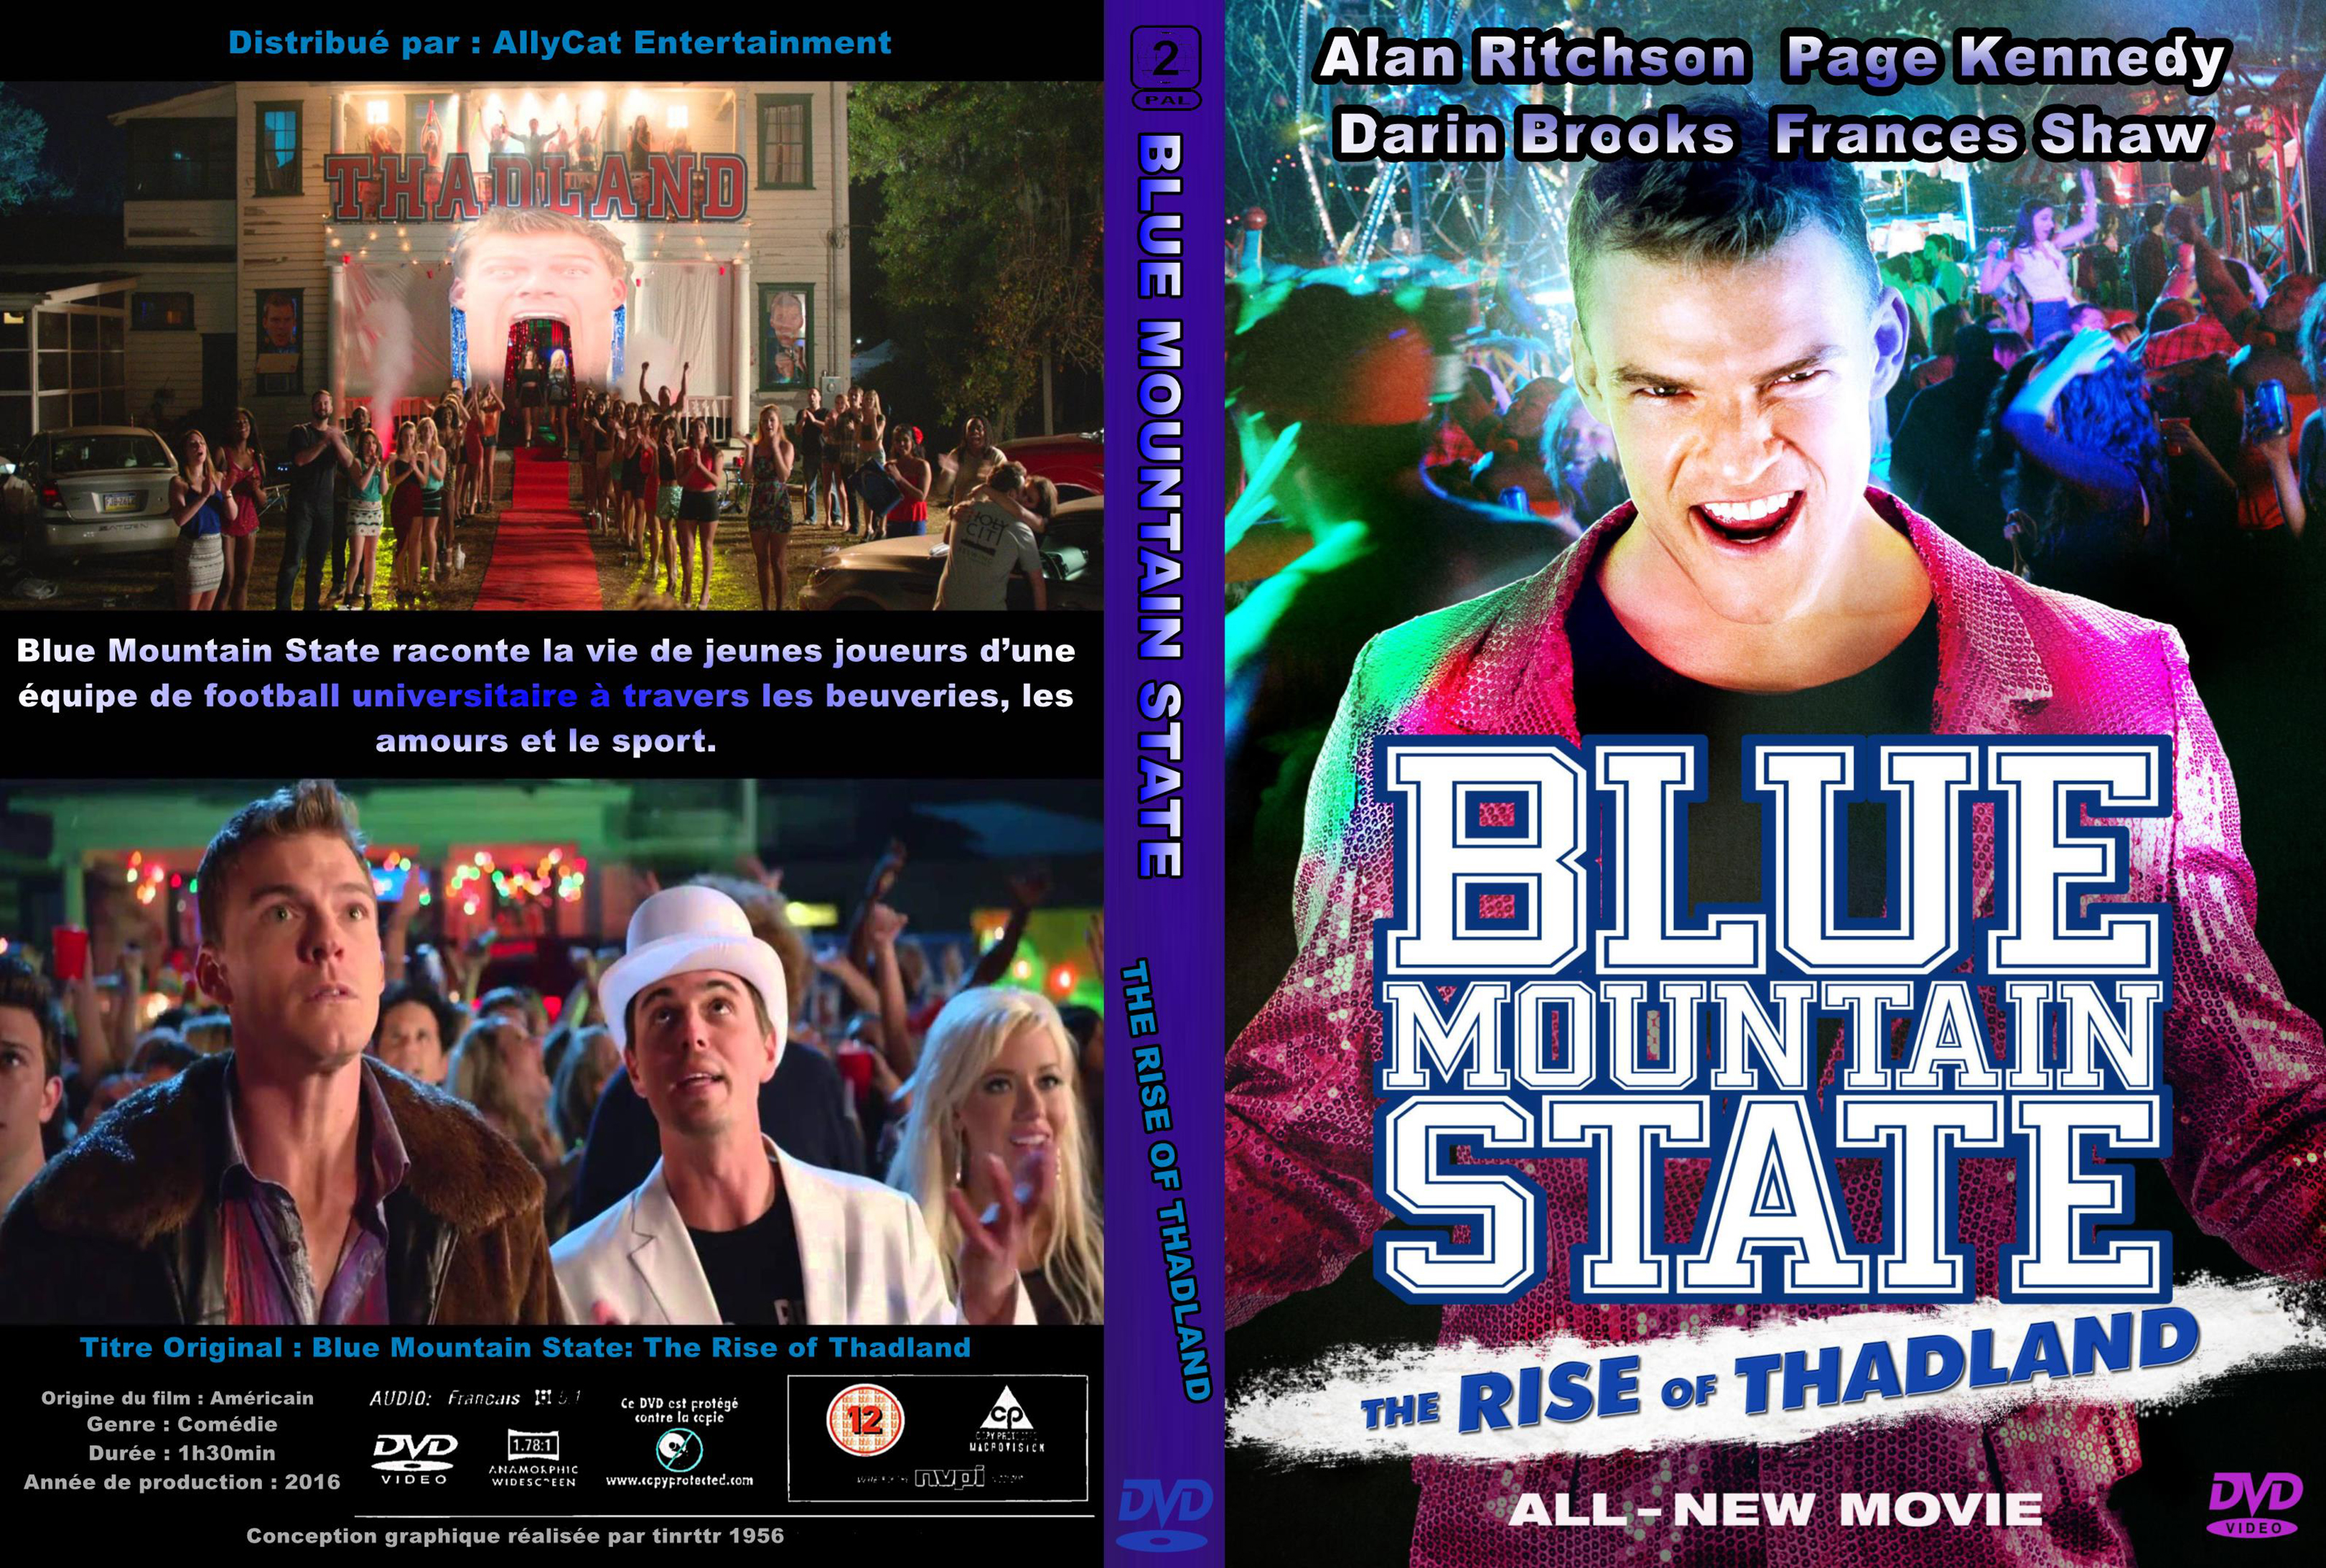 Jaquette DVD Blue mountain state custom